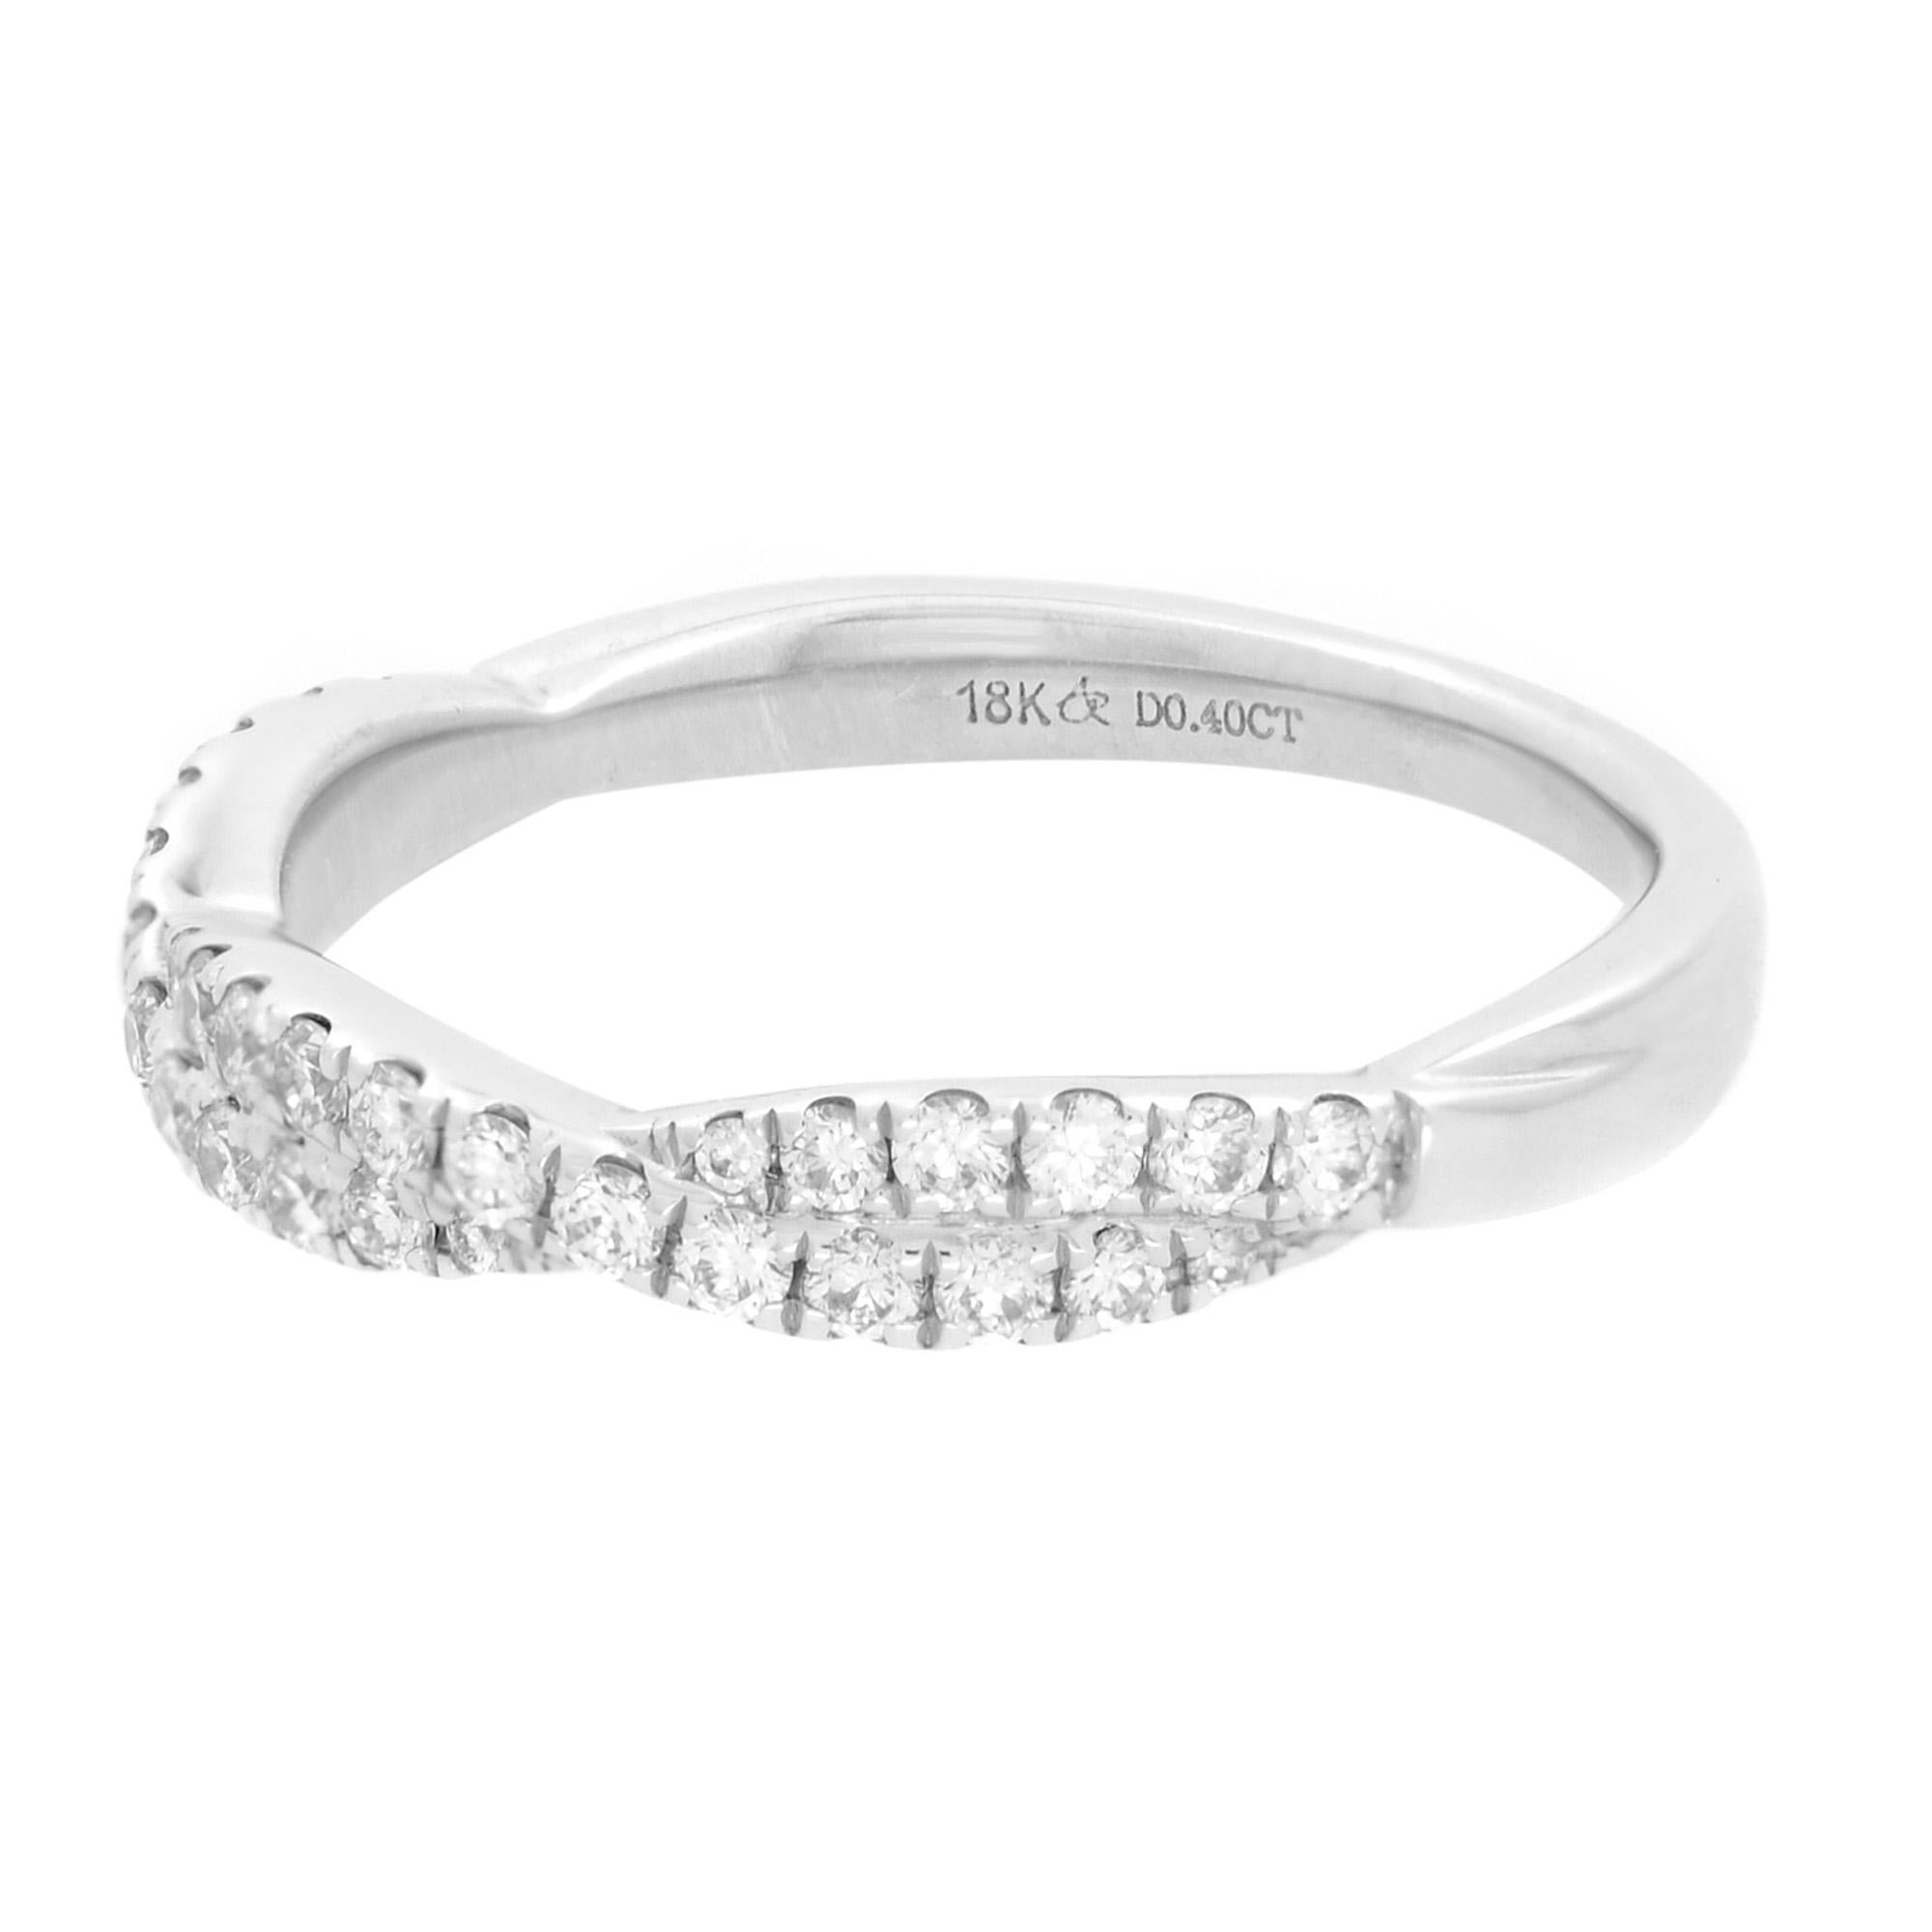 Simple and sophisticated, pavé twist diamond wedding ring. Crafted in bright 18k white gold, two rows of petite pavé-set round brilliant-cut diamonds intertwine for a timeless, eye-catching style. Carat weight: 0.40. Diamond color I and SI-I